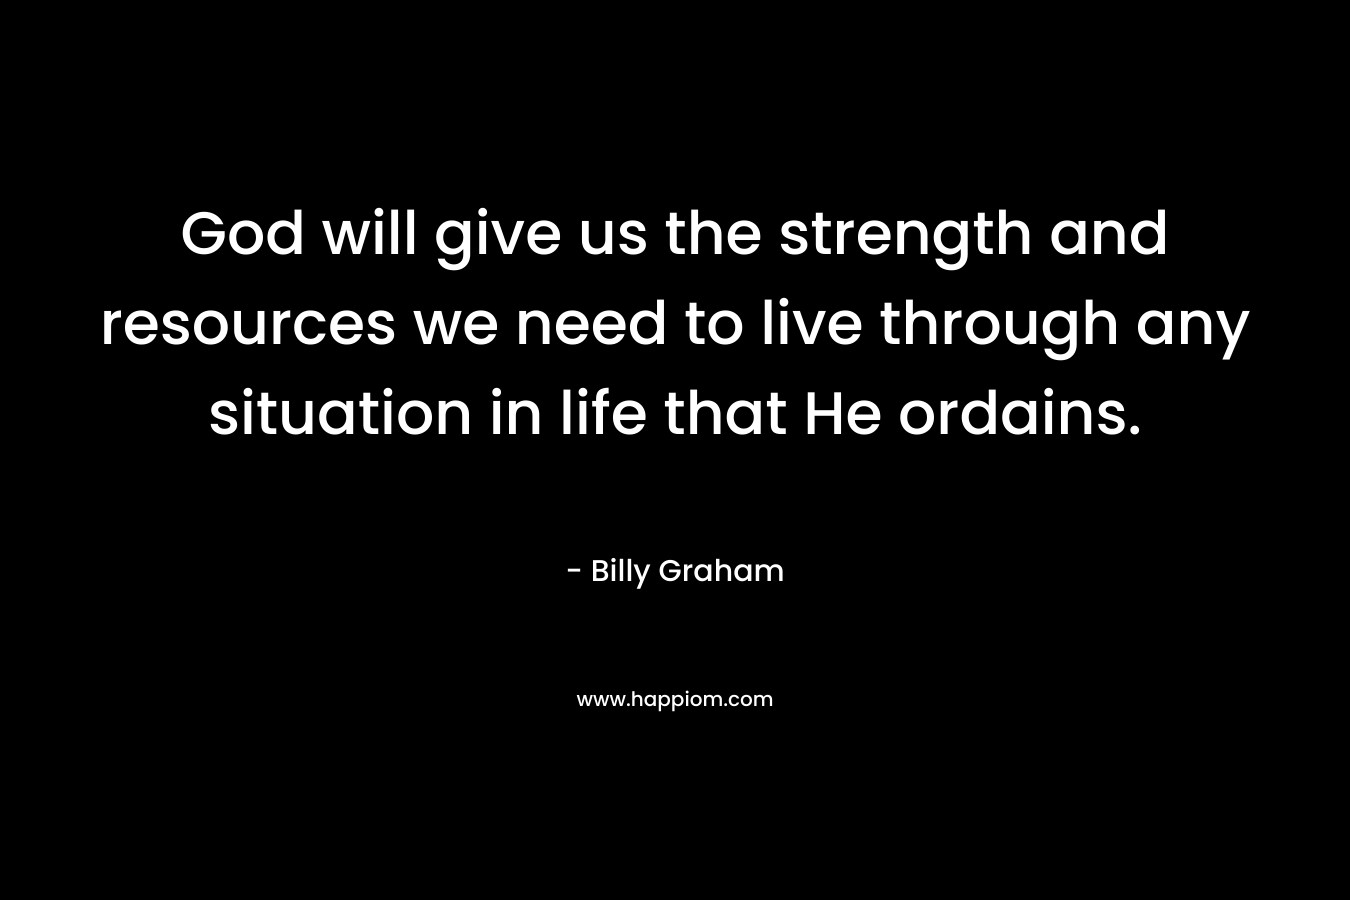 God will give us the strength and resources we need to live through any situation in life that He ordains.